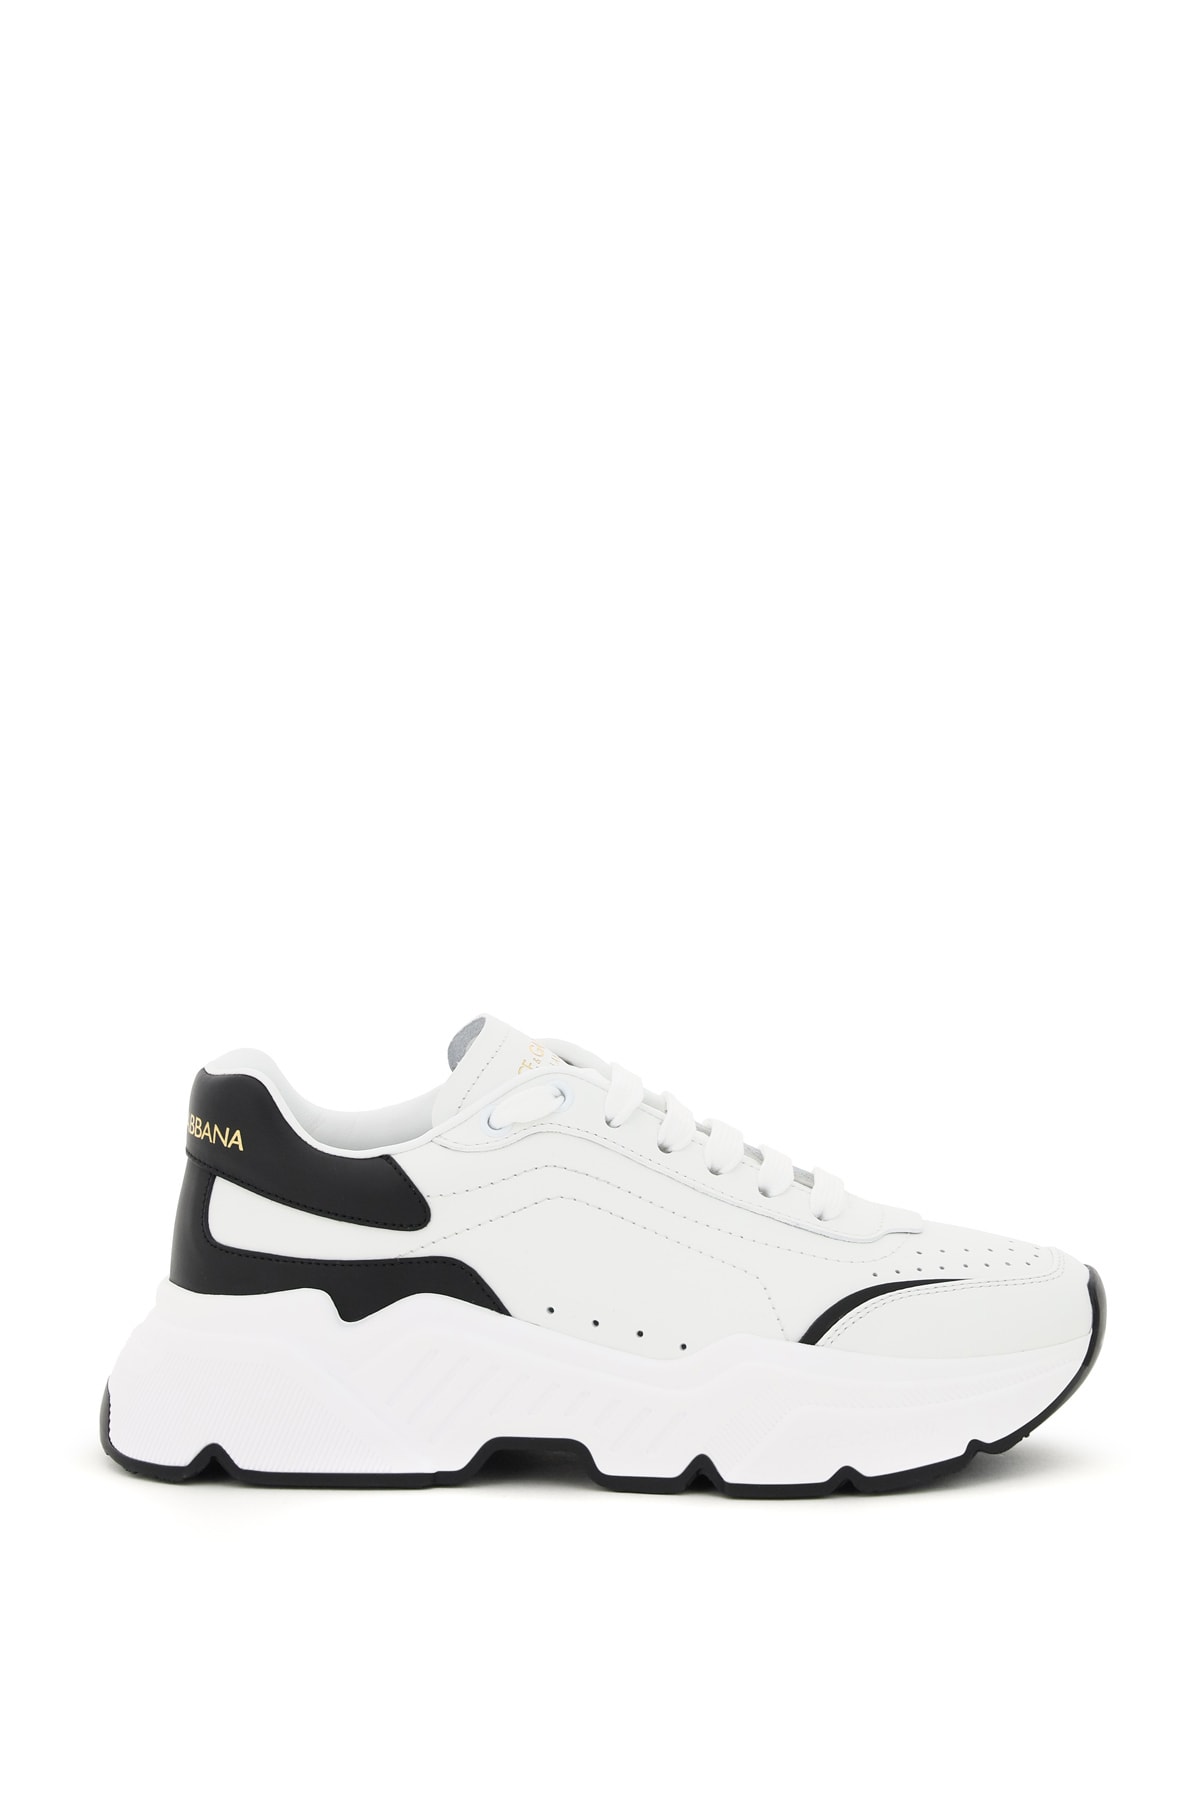 Dolce & Gabbana Daymaster Leather Sneakers